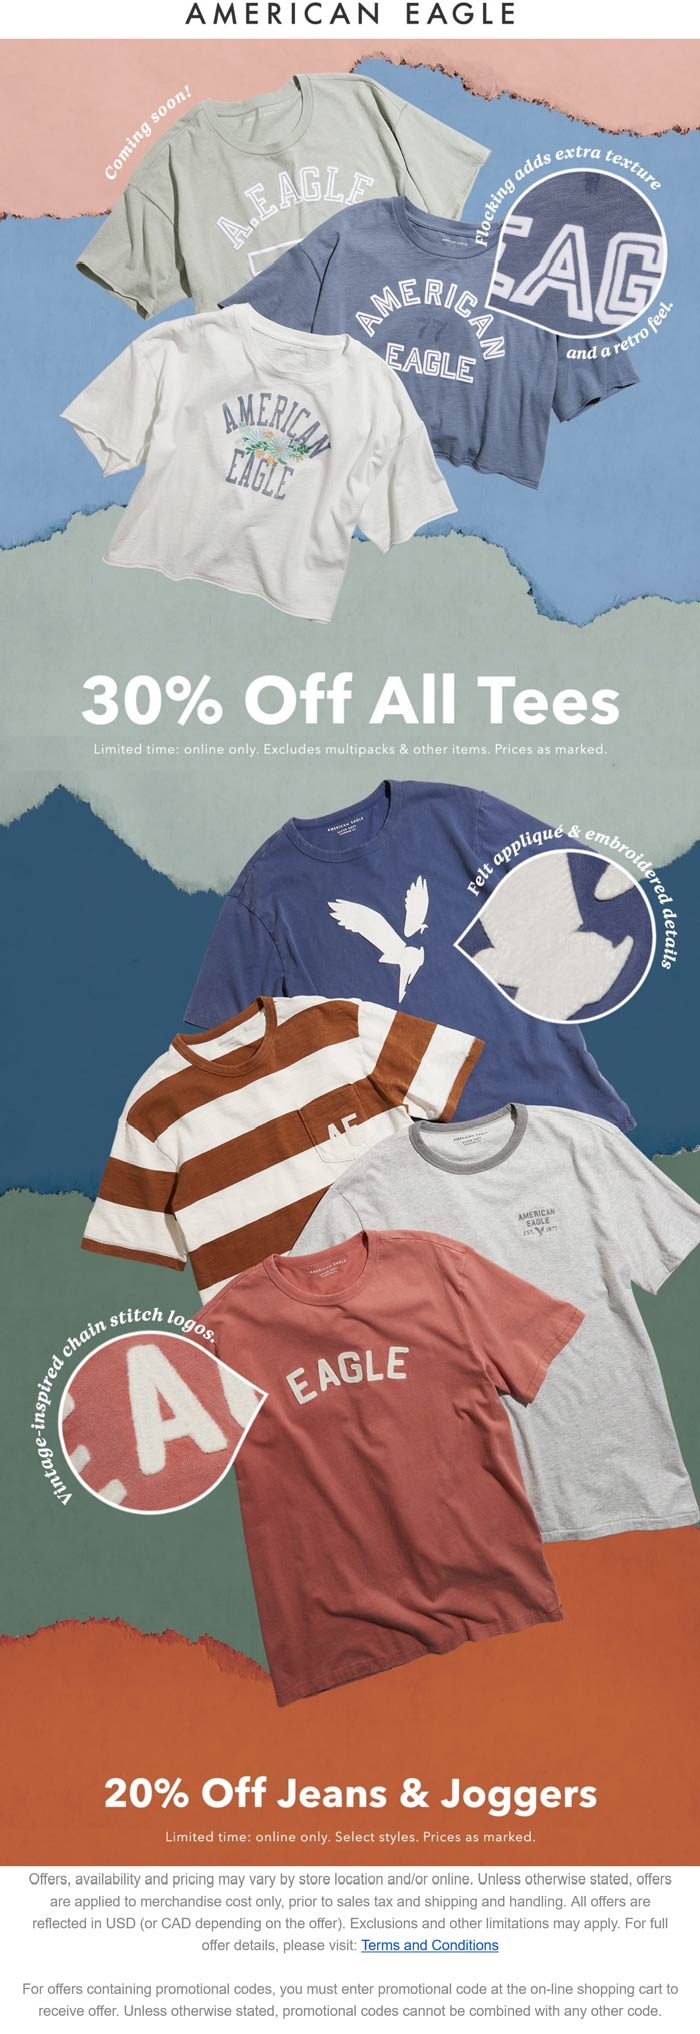 American Eagle stores Coupon  30% off all tees & 20% off jeans online at American Eagle #americaneagle 